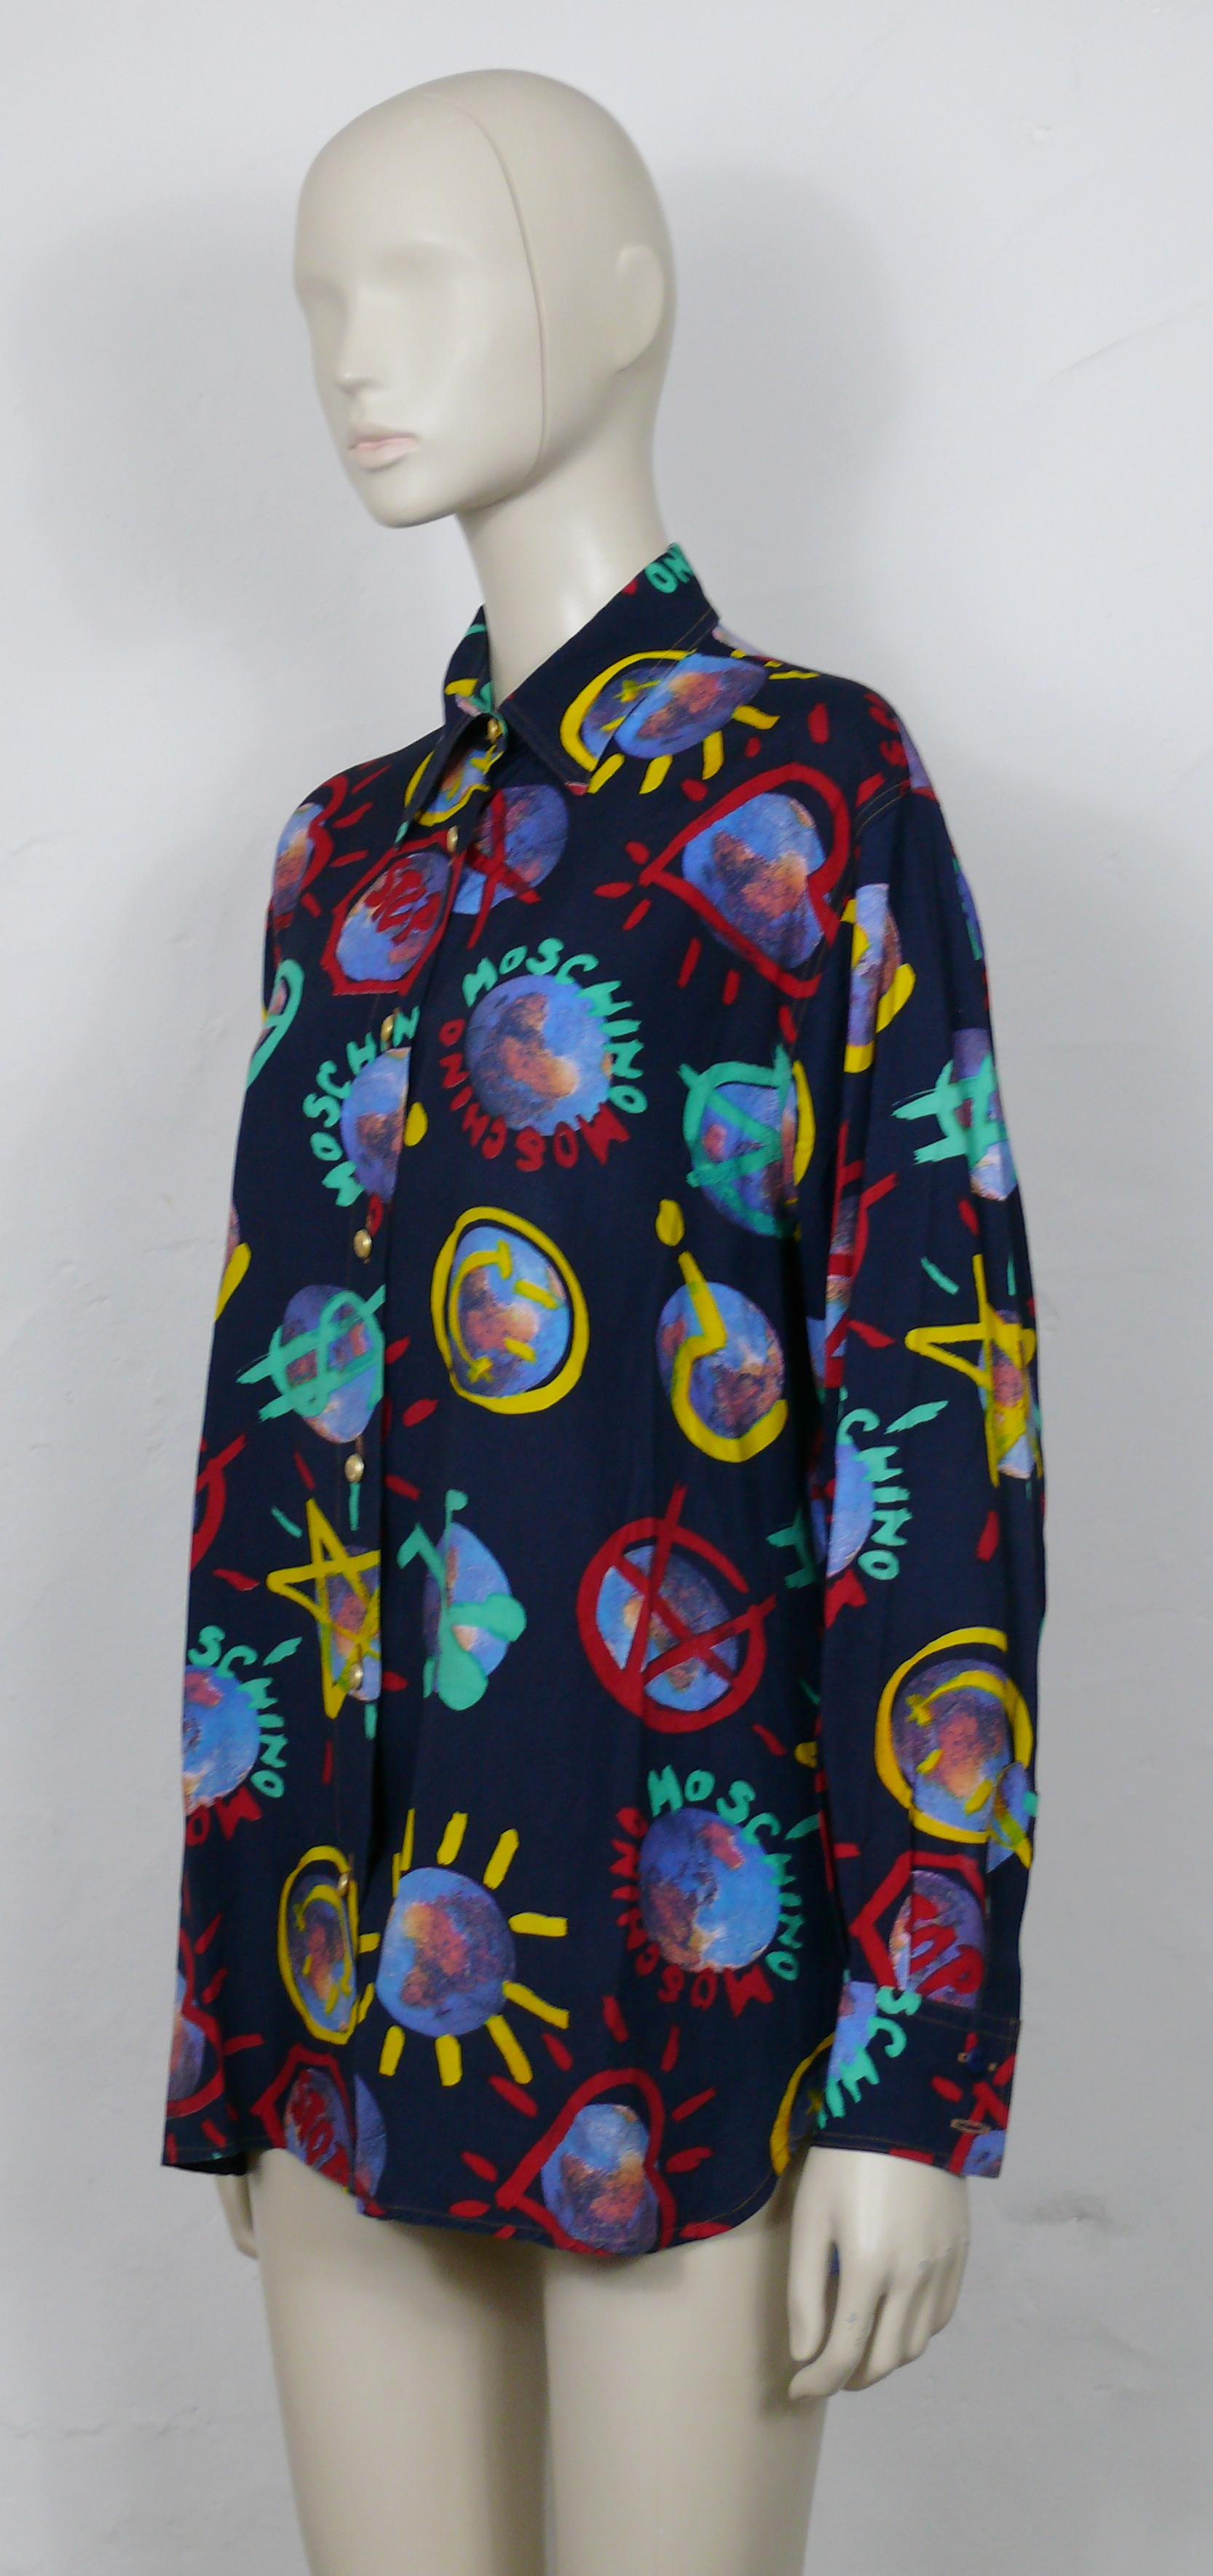 Moschino Vintage Earth Peace Smiley Anarchy... Print Shirt For Sale 3